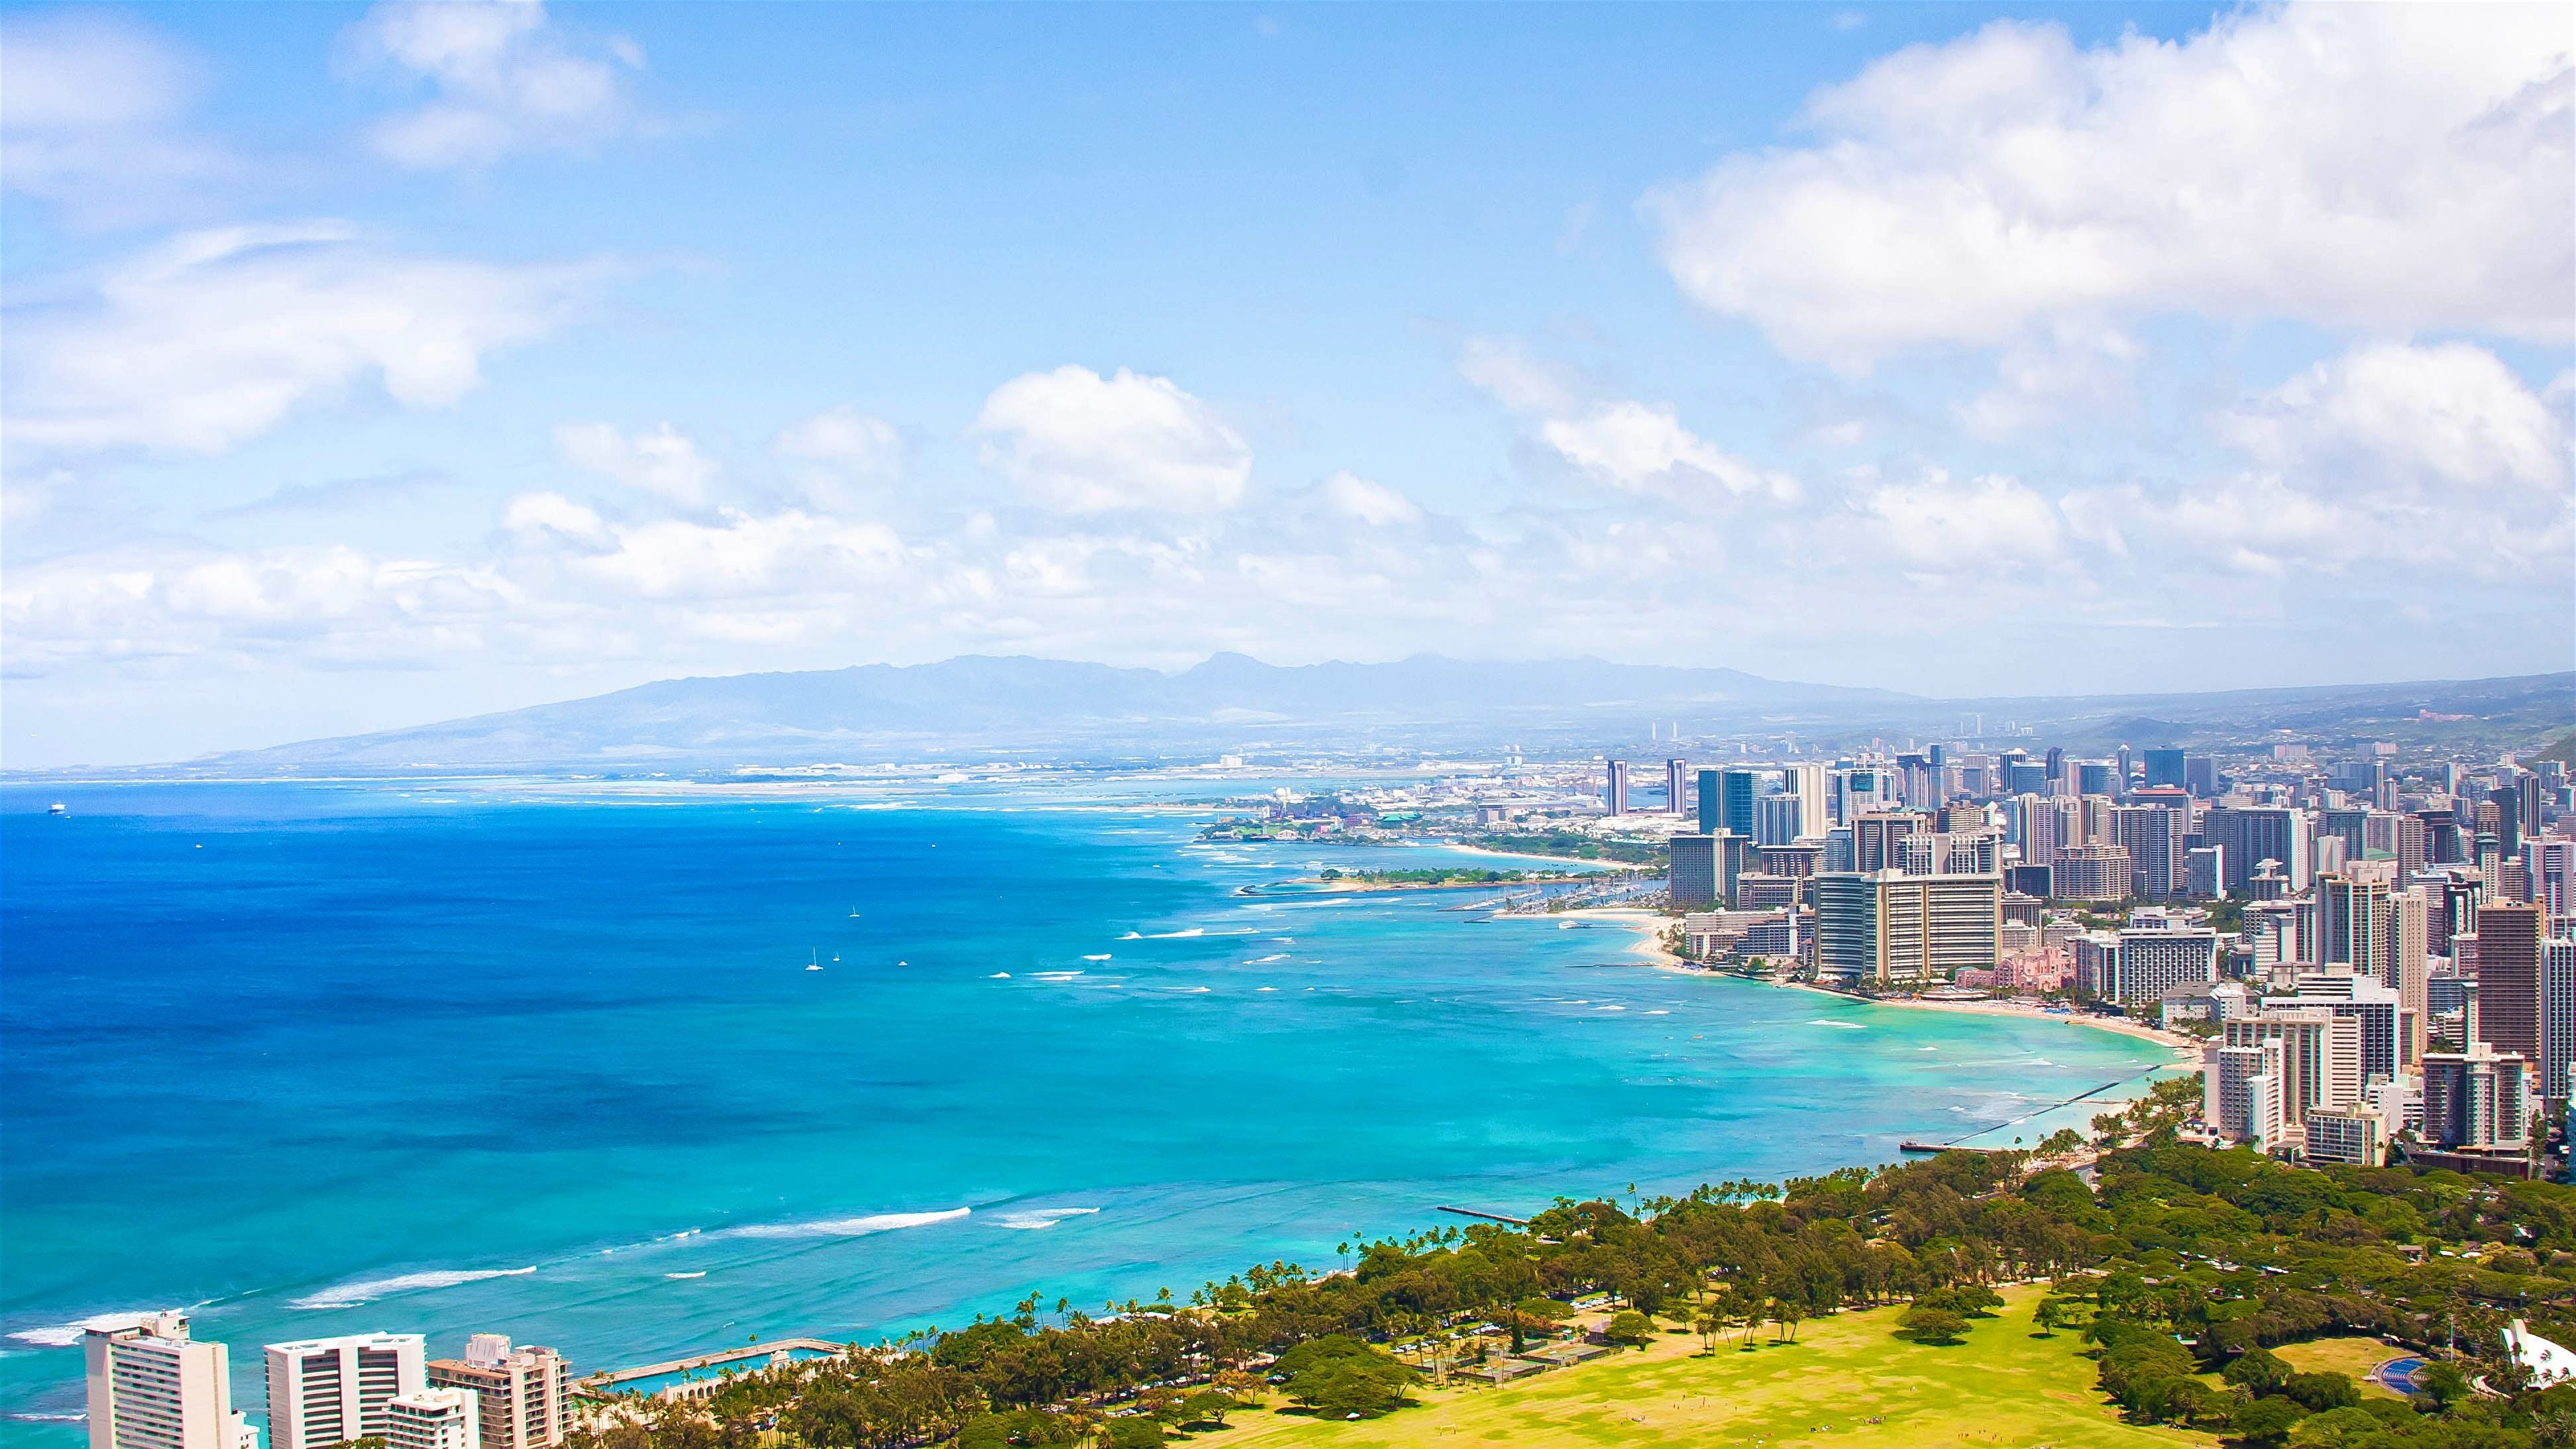 Honolulu 4K wallpaper for your desktop or mobile screen free and easy to download